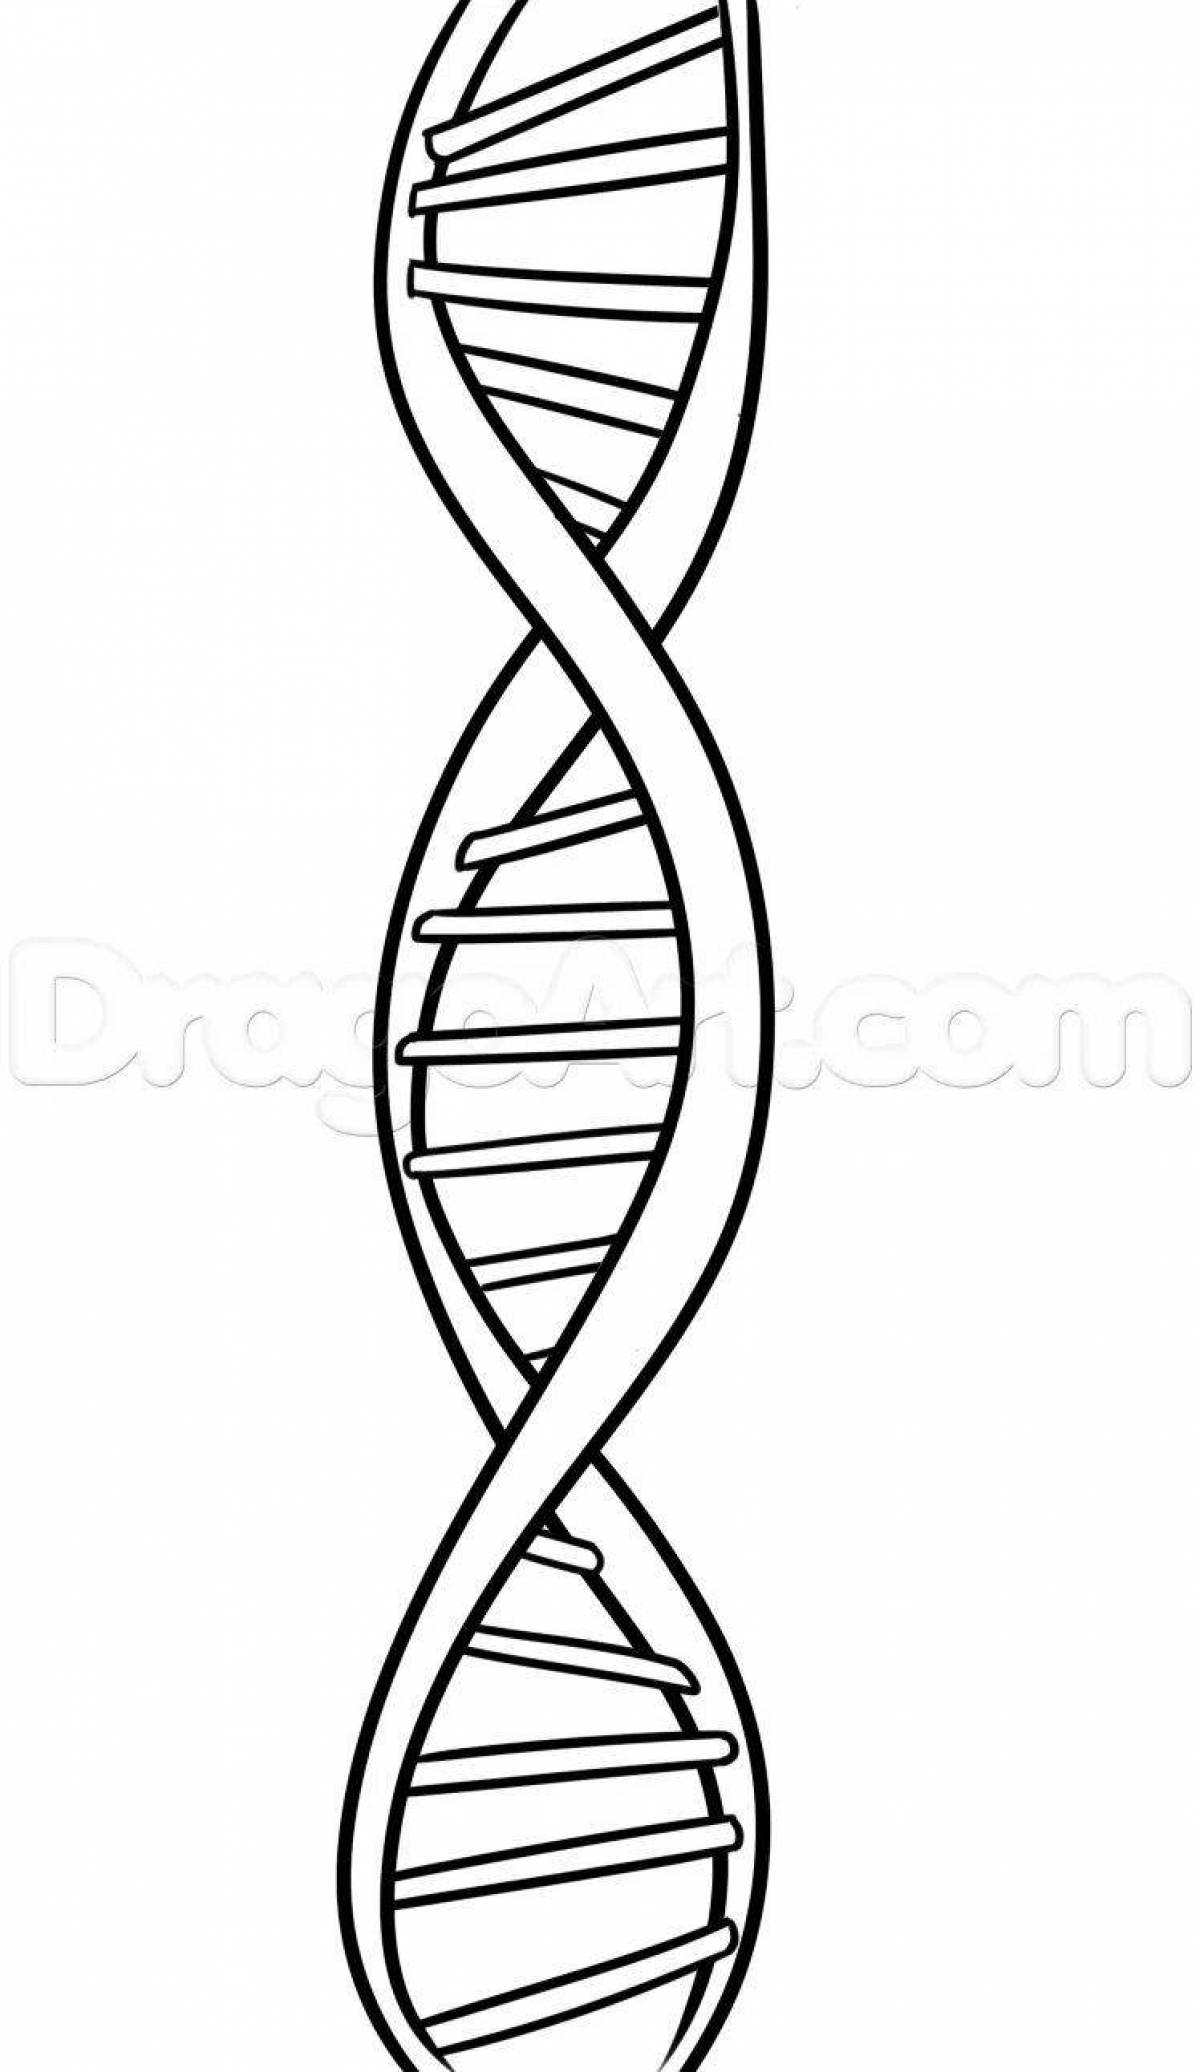 Tempting dna coloring page